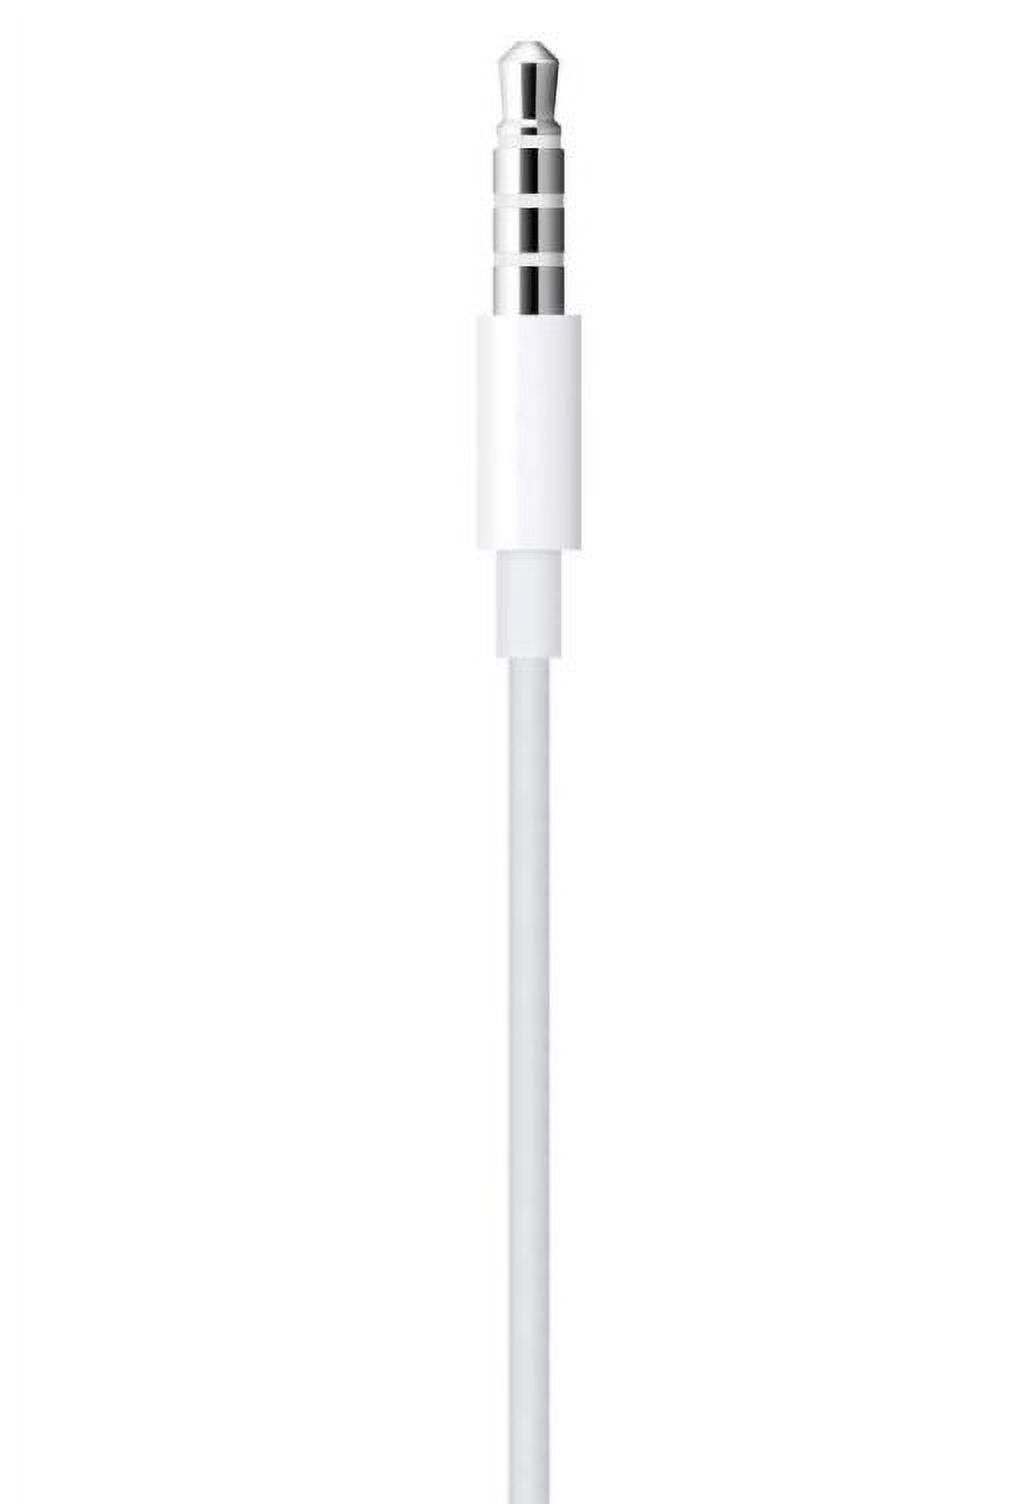 Apple In-Ear Headphones, White, MD827LL/A - image 2 of 4